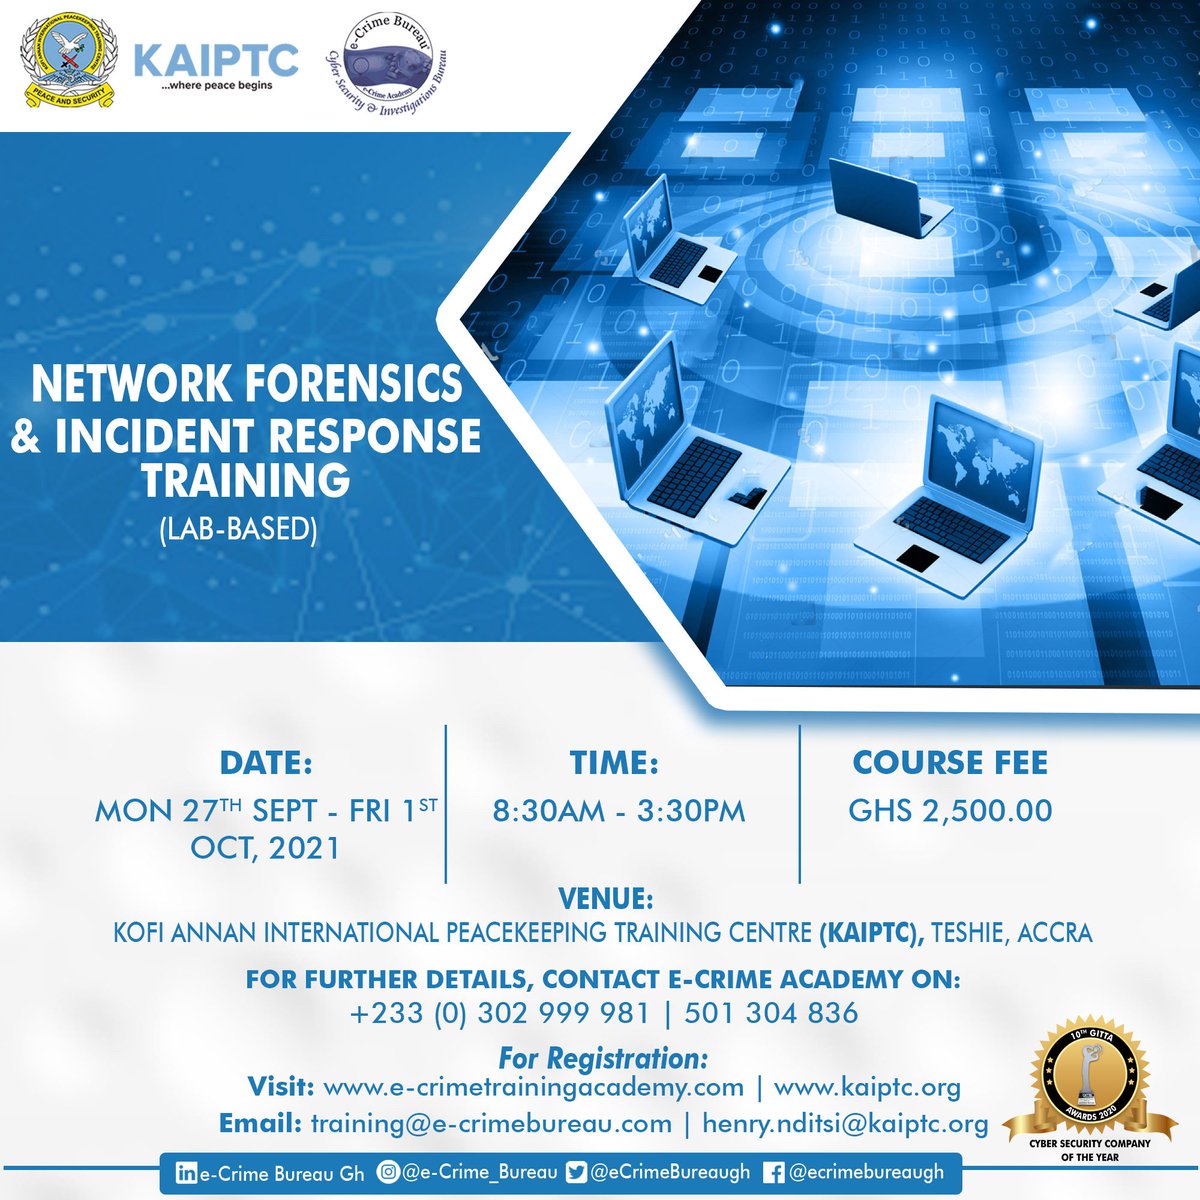 Join our Network Forensics and Incident Response course coming up at the Kofi Annan International Peacekeeping Training Centre(KAIPTC).

#Networkbreaches
#Cyberbreaches
#CyberForensics
#IncidentResponse
#Investigations
#KAIPTC